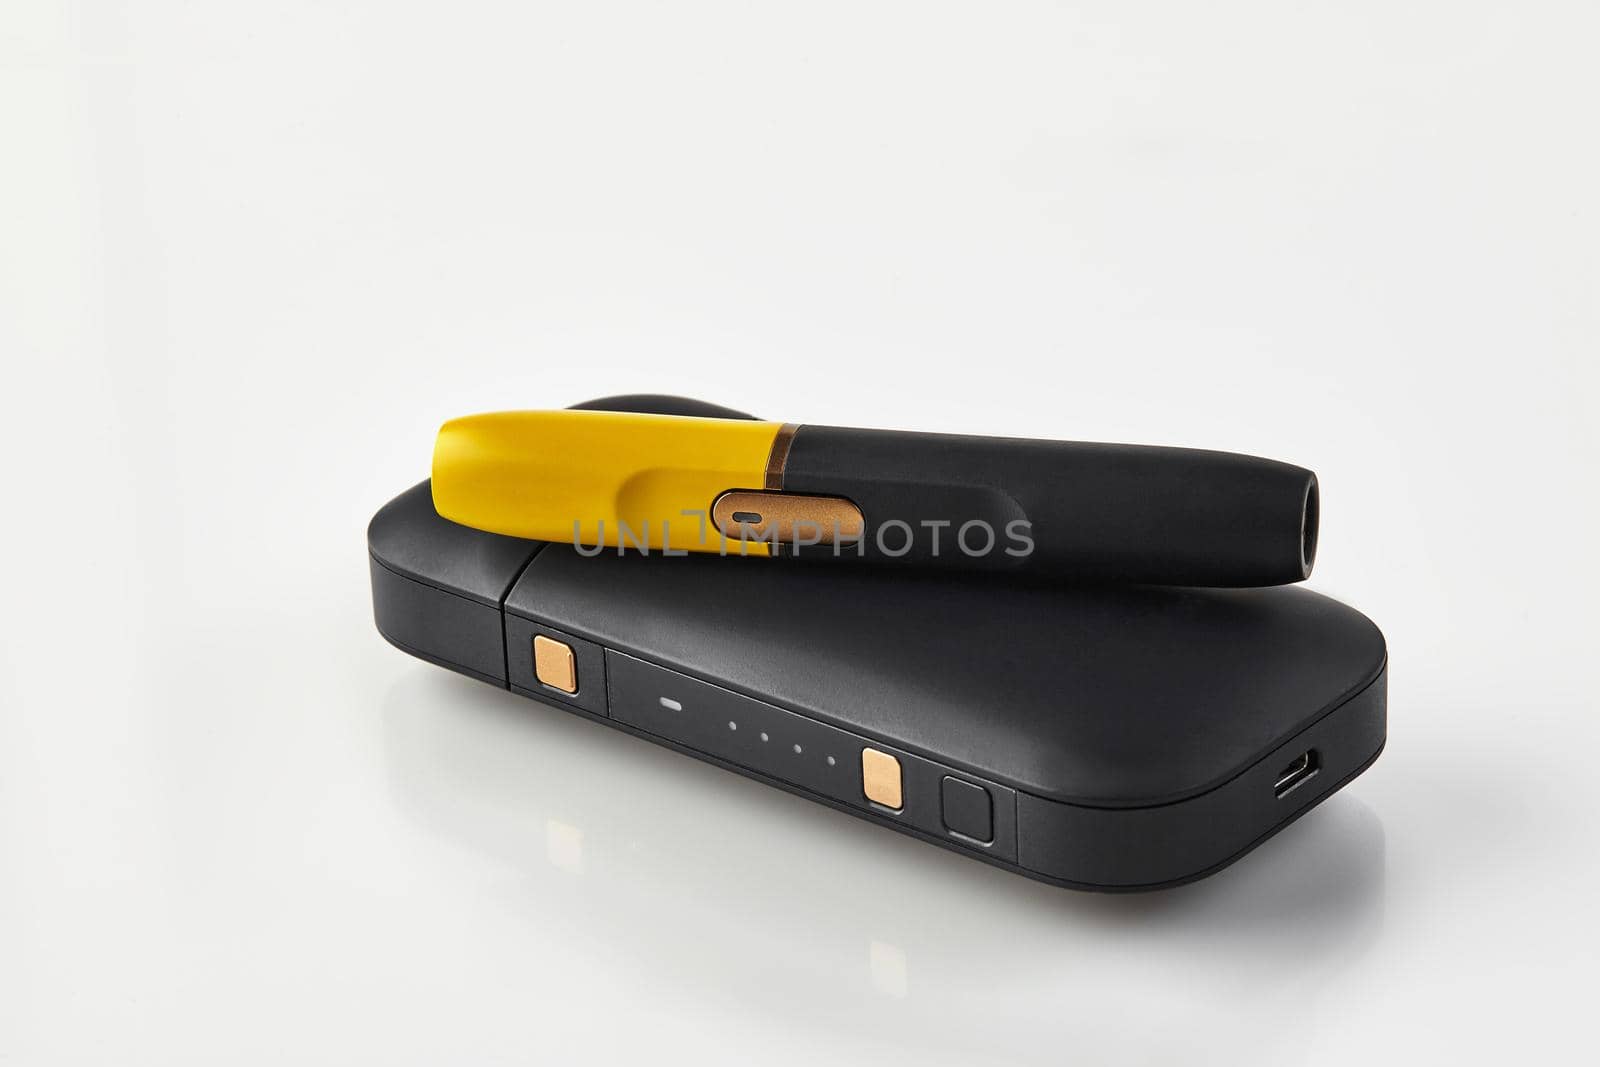 New generation black and yellow electronic cigarette is on battery, isolated on white. Hi-tech heating tobacco system. Hybrid between analog and electronic. Advertising, close up, copy space